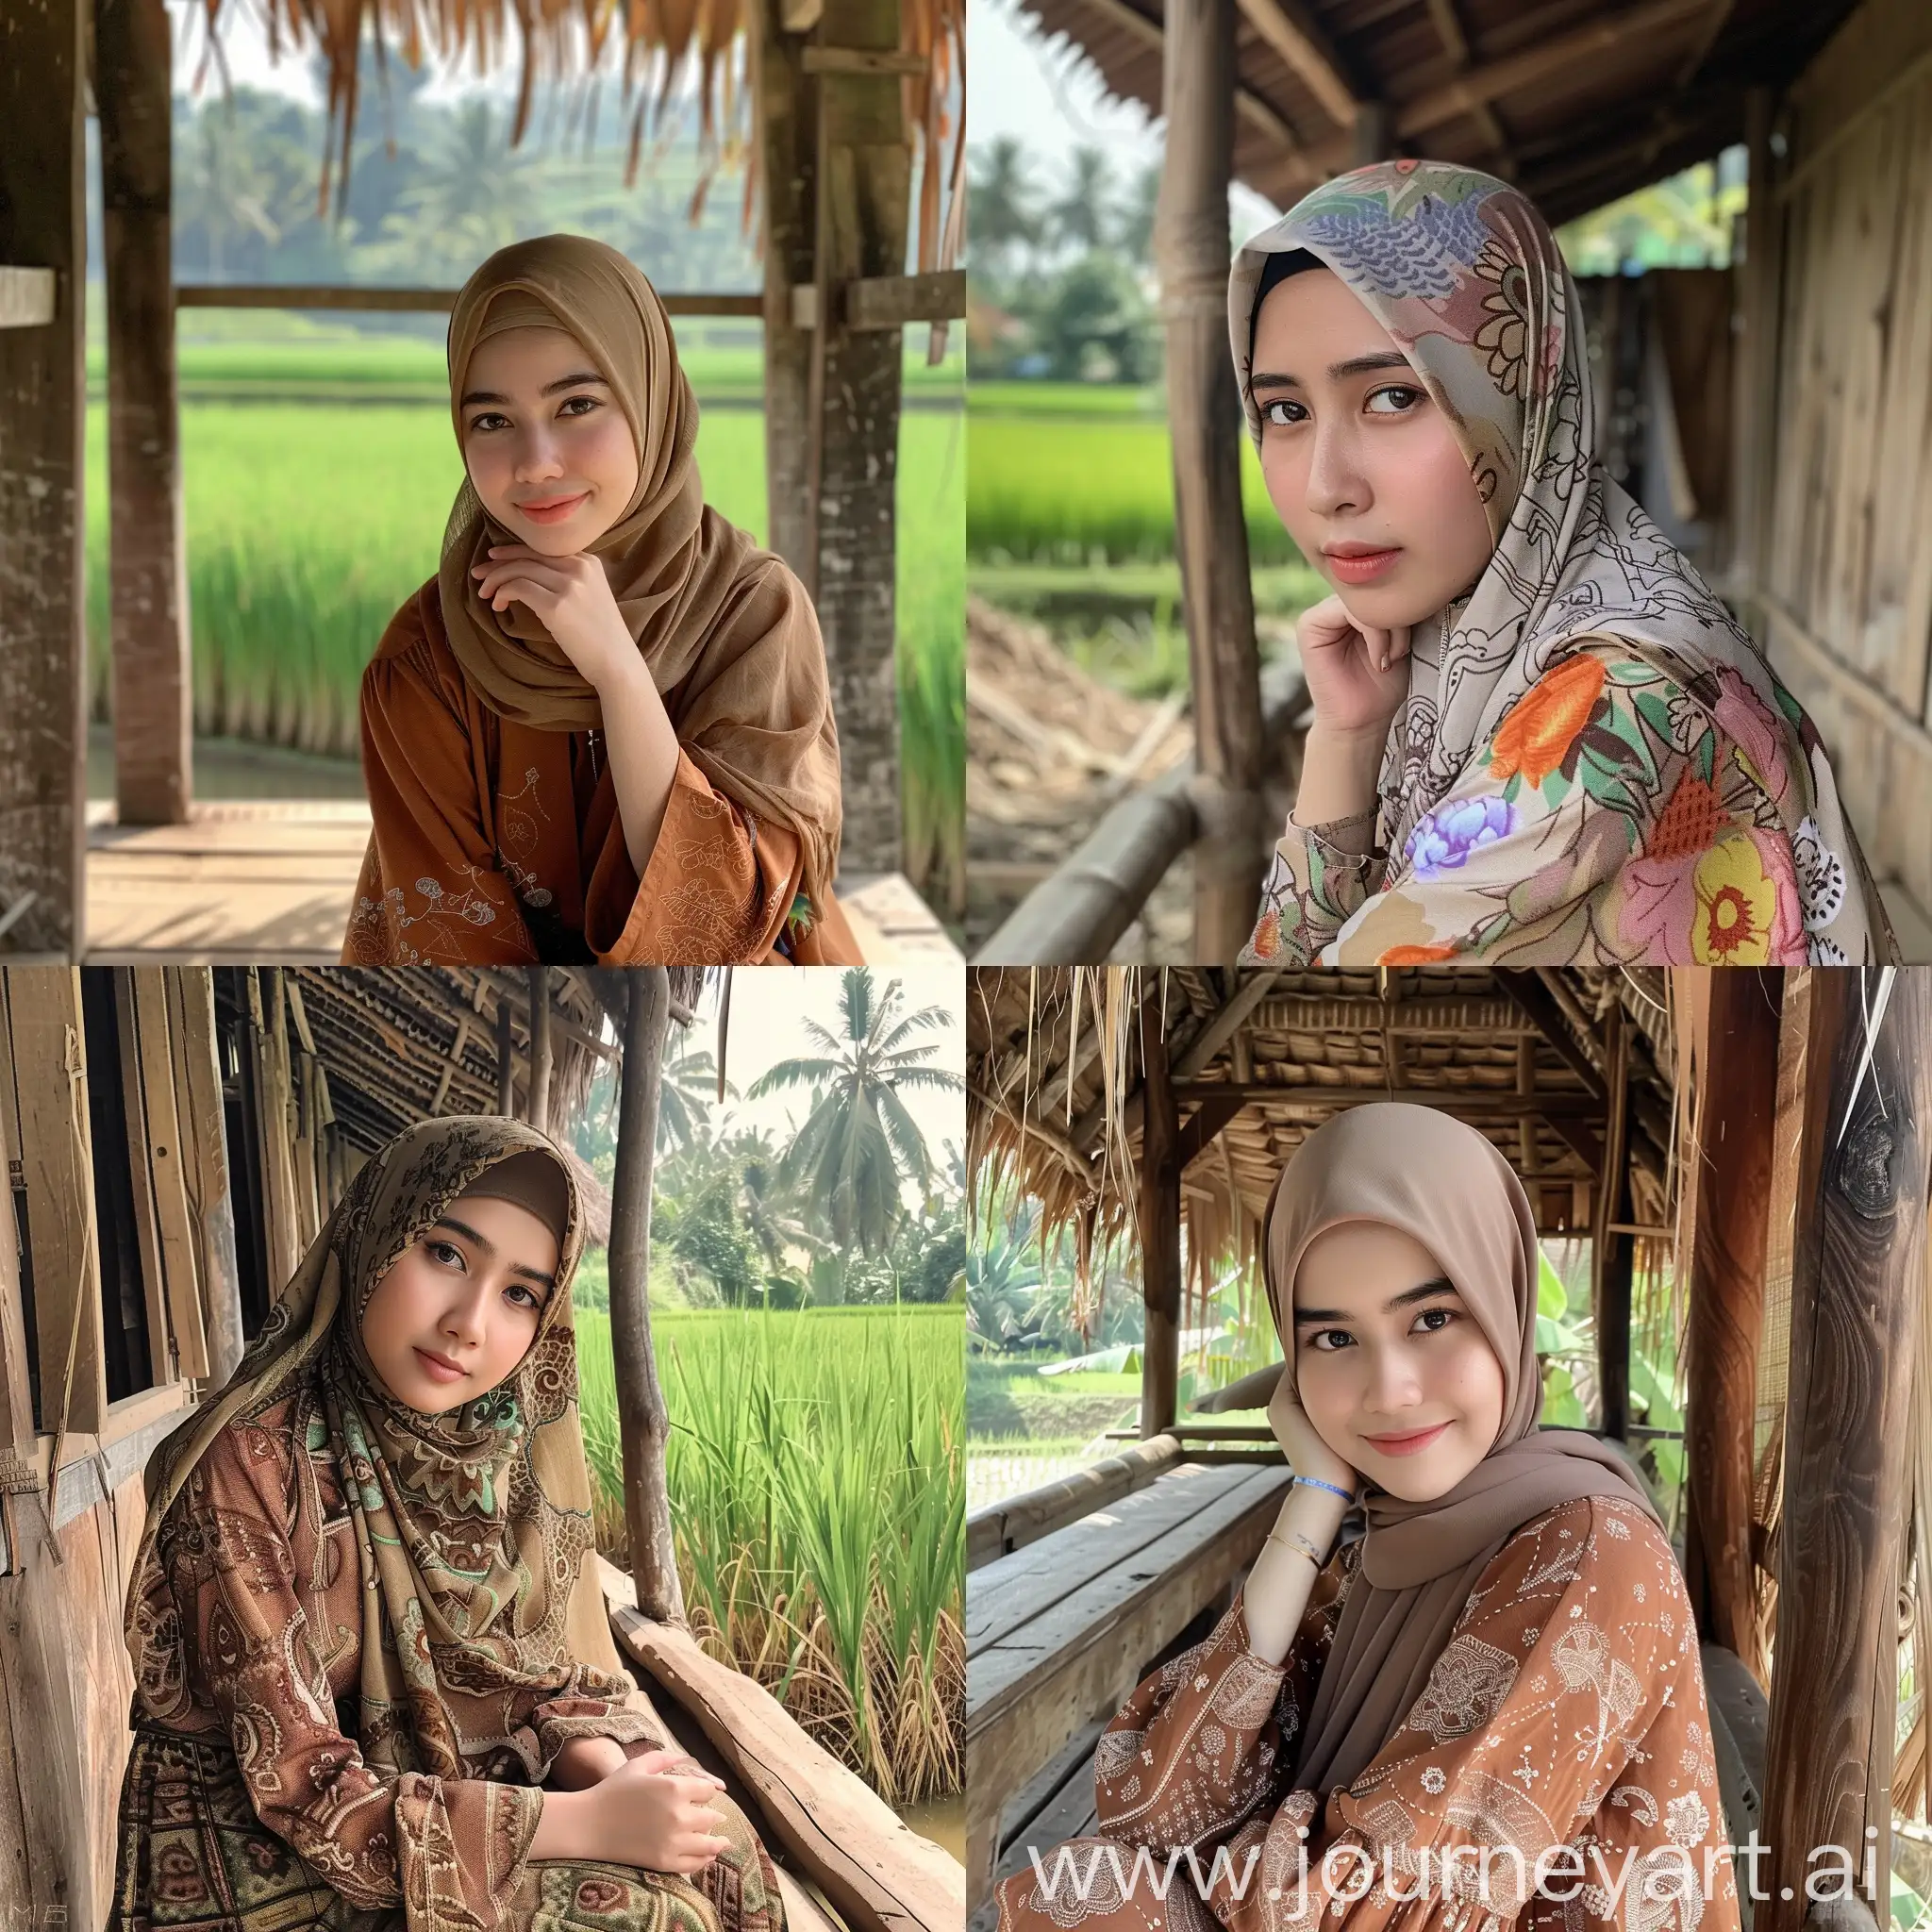 Influencer-Portrait-Indonesian-Hijabi-Beauty-in-Natural-Rice-Field-Setting